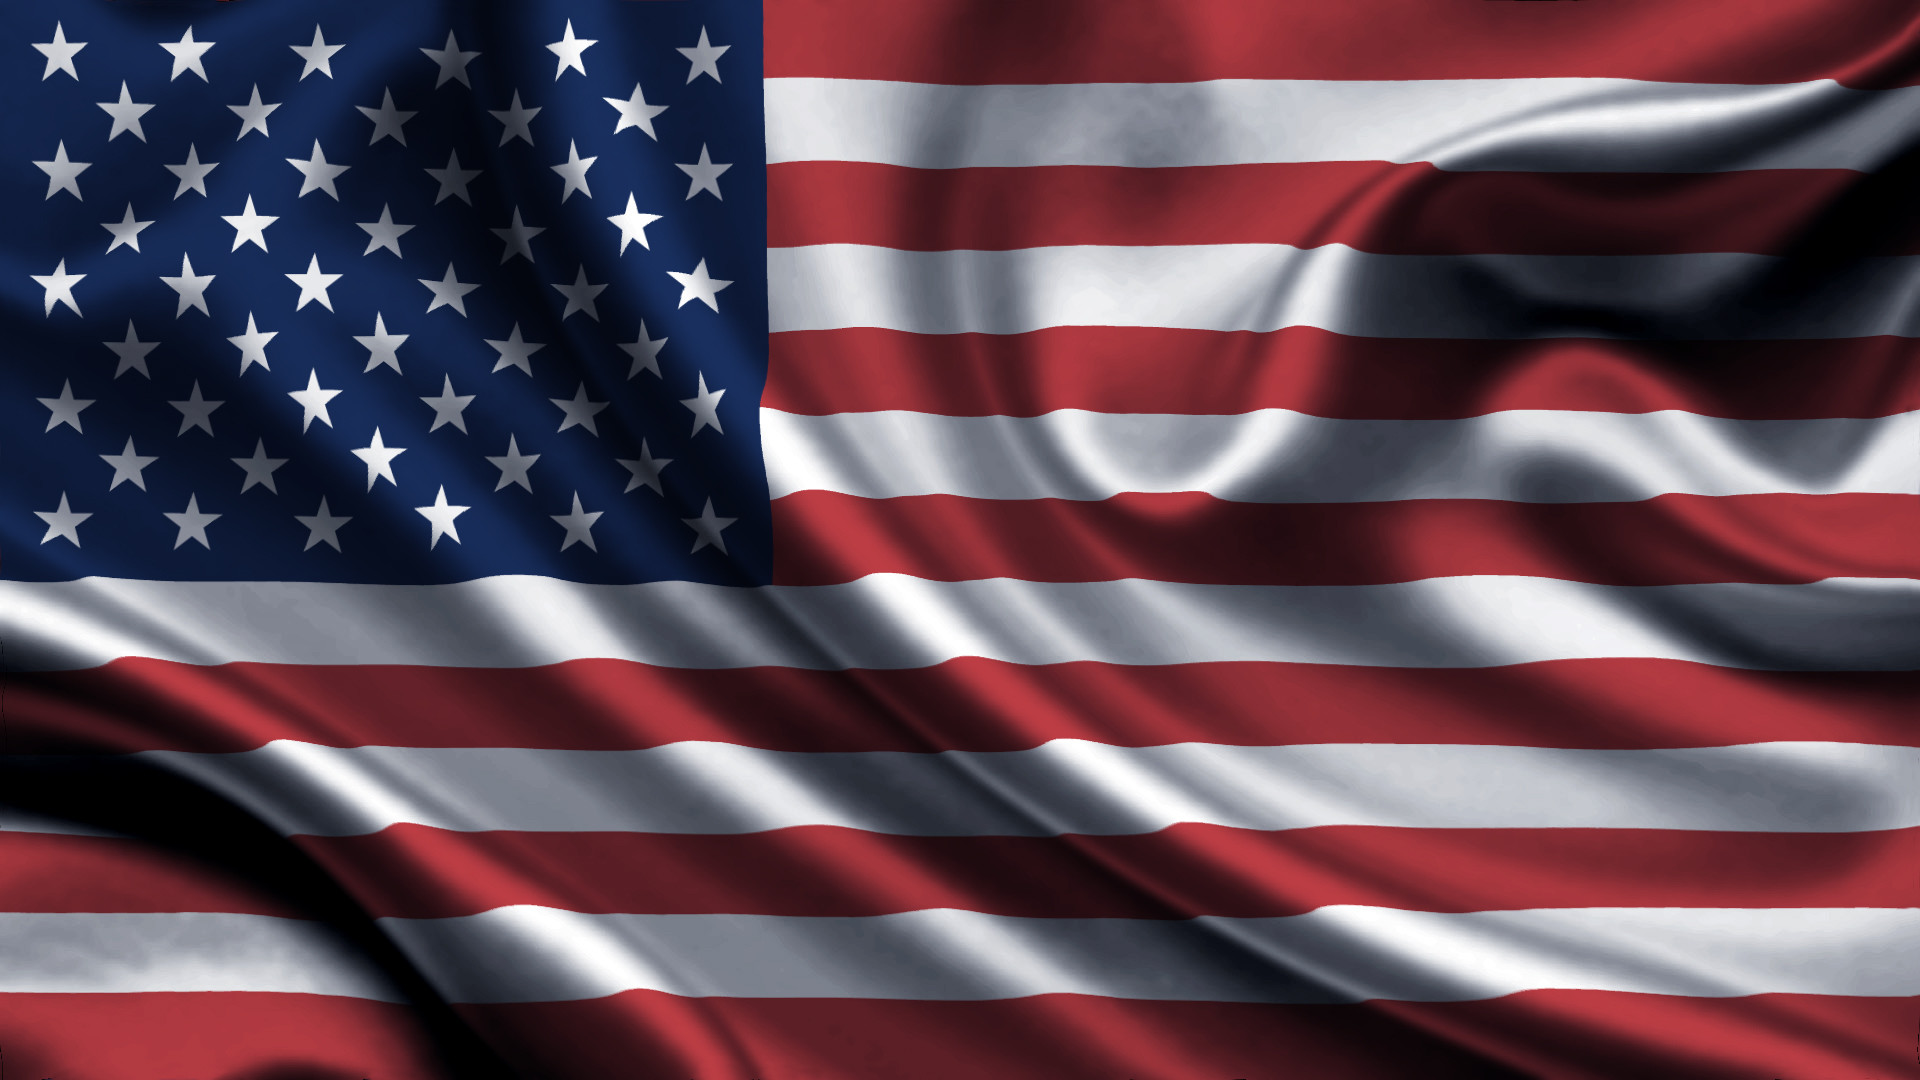 1920x1080 American Flag Backgrounds Wallpapers Backgrounds Images Art lAEru70G